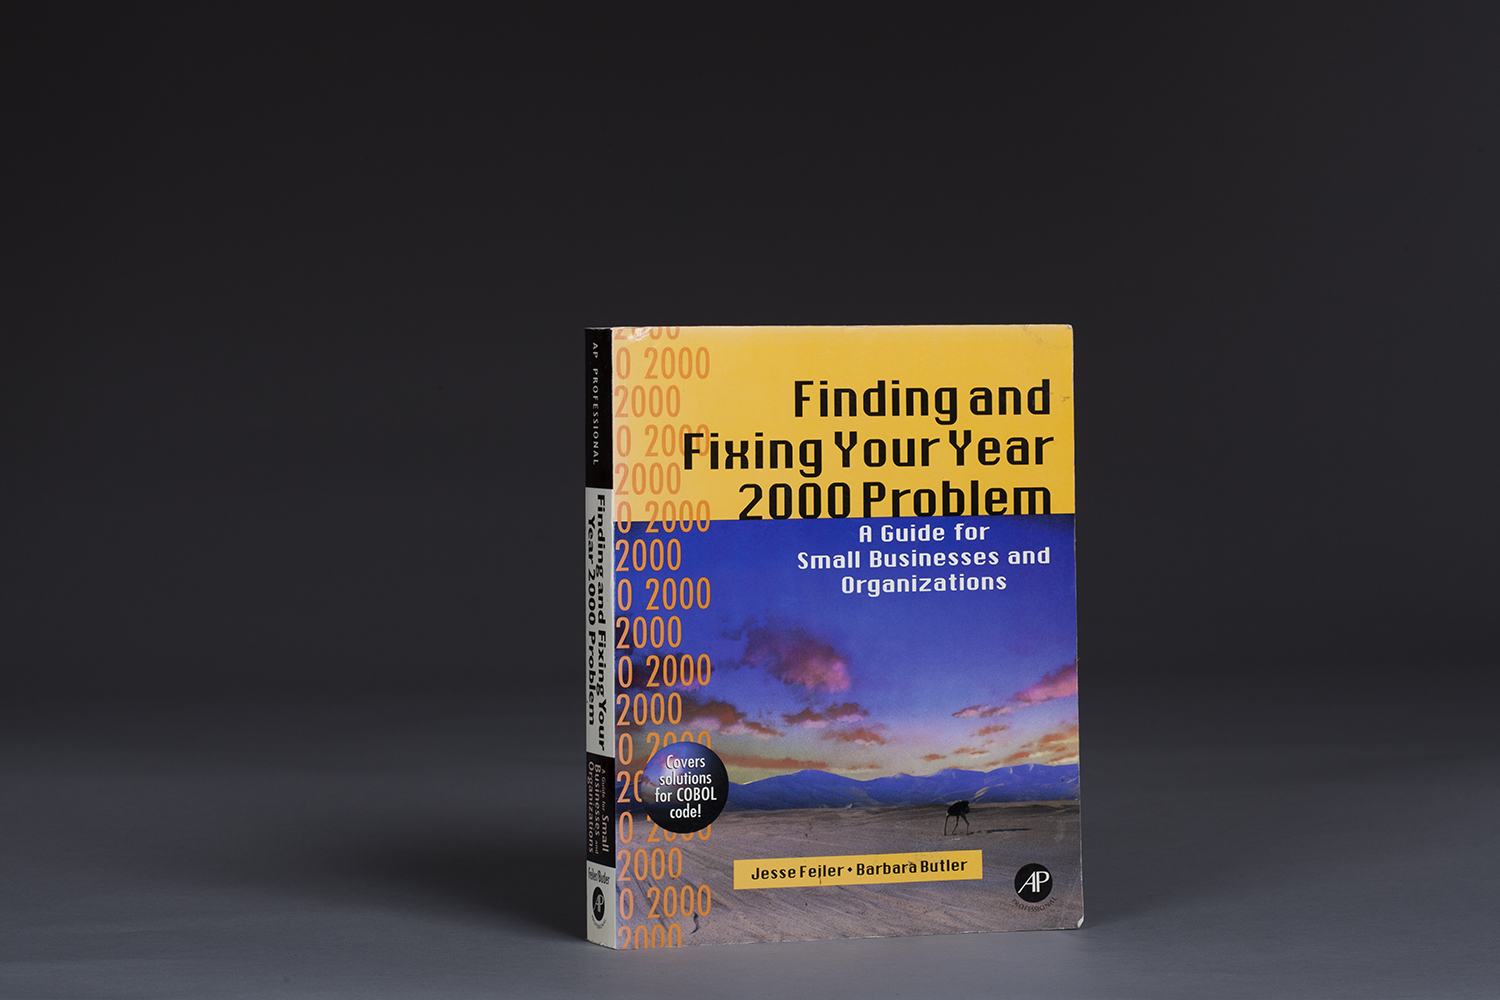 Finding and Fixing Your Year 2000 Problem - 0101 Cover.jpg